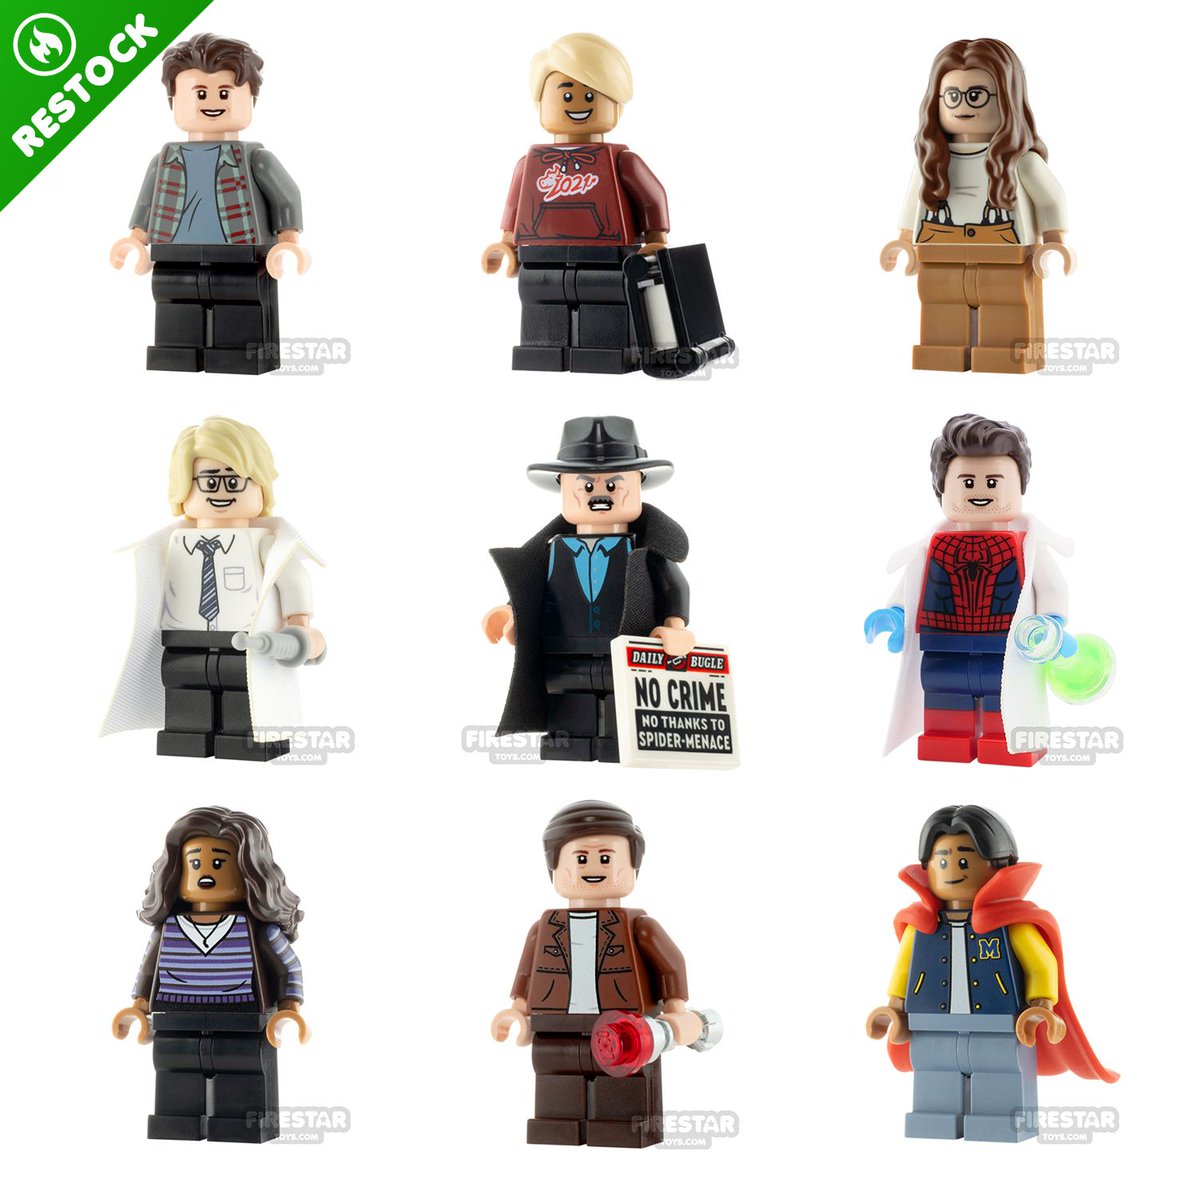 Grow your 'Forgotten Wall-Crawler' collection with these 9 newly restocked, Custom Created minifigures inspired by 'No Way Home'! Perfect for any fan, these unique additions bring the multiverse to life! 🕷️🏡

Restocked at firestartoys.com 🔥⭐️